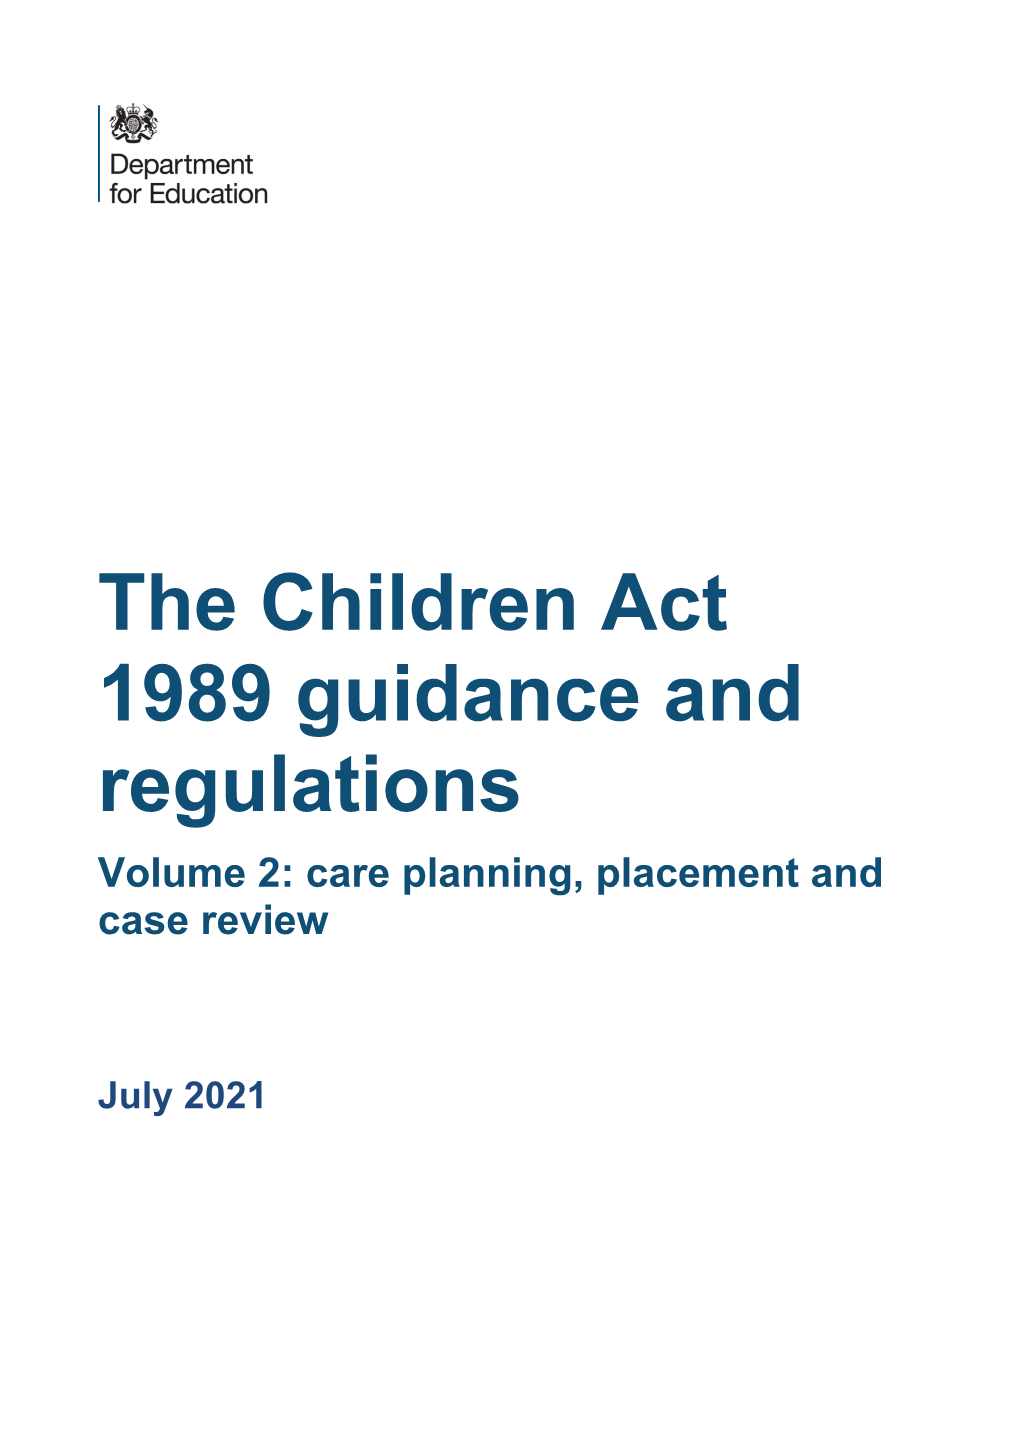 The Children Act 1989 Guidance and Regulations Volume 2: Care Planning, Placement and Case Review